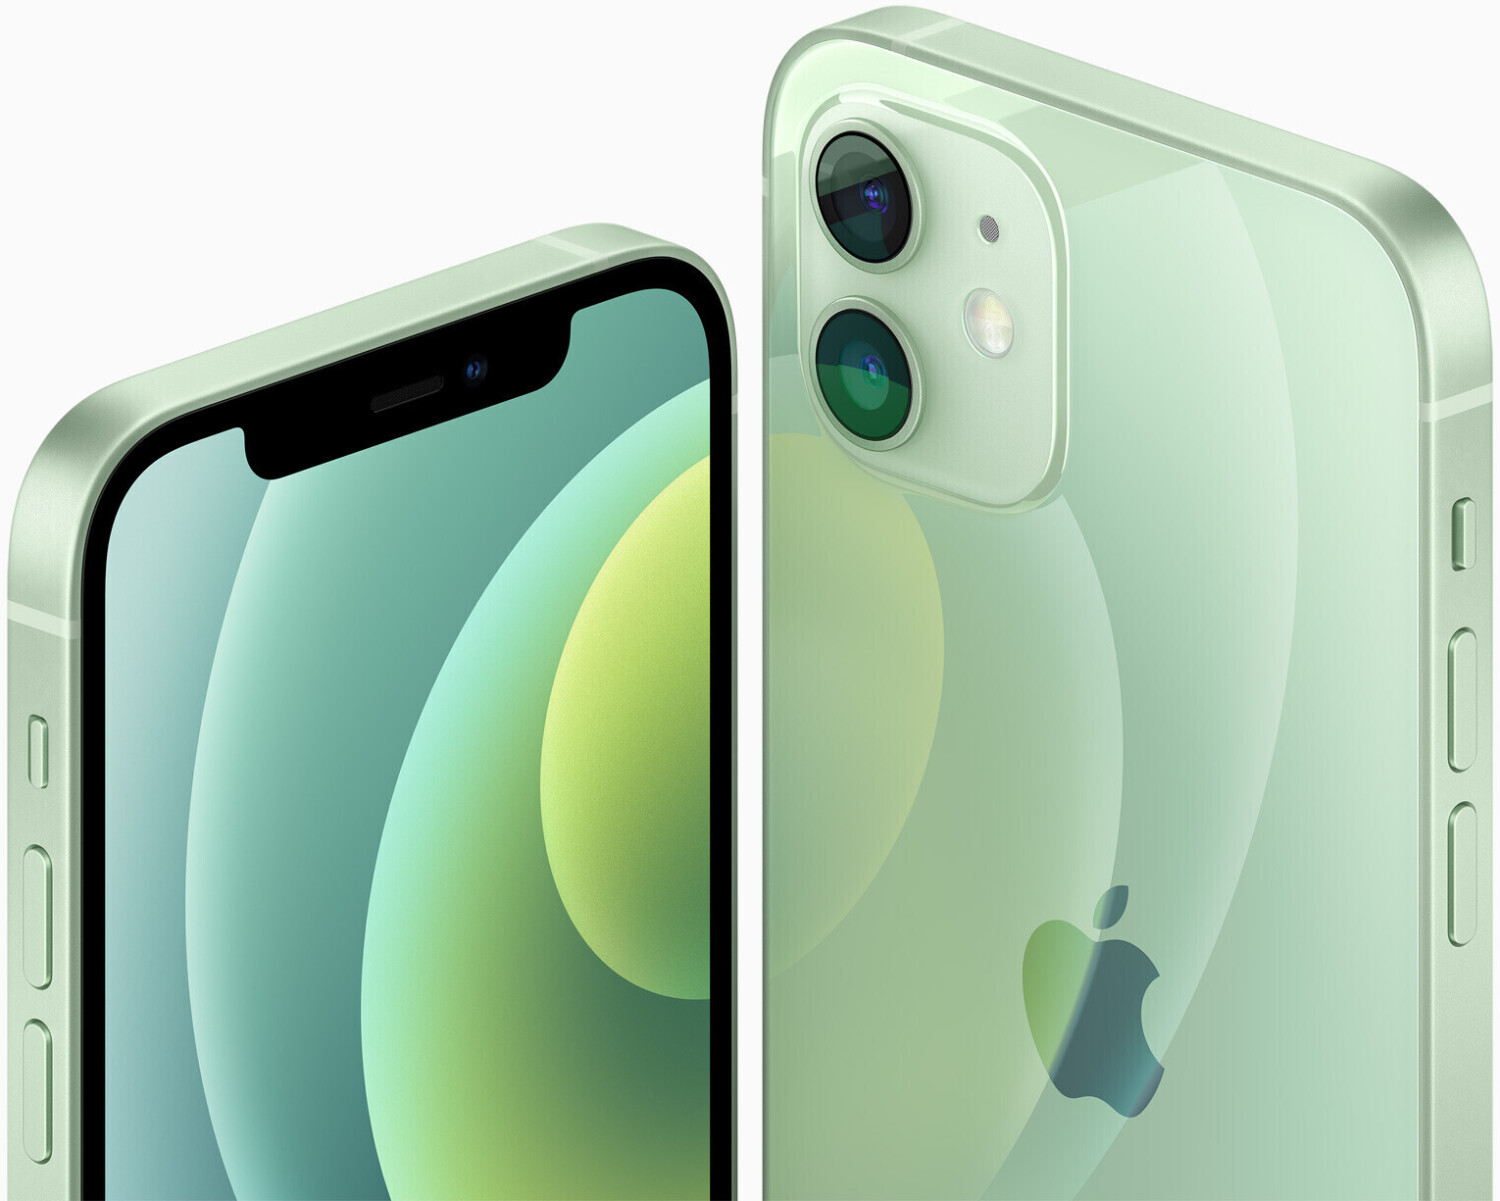 Buy Apple iPhone 12 128GB Green from £499.00 (Today) – Best Deals on